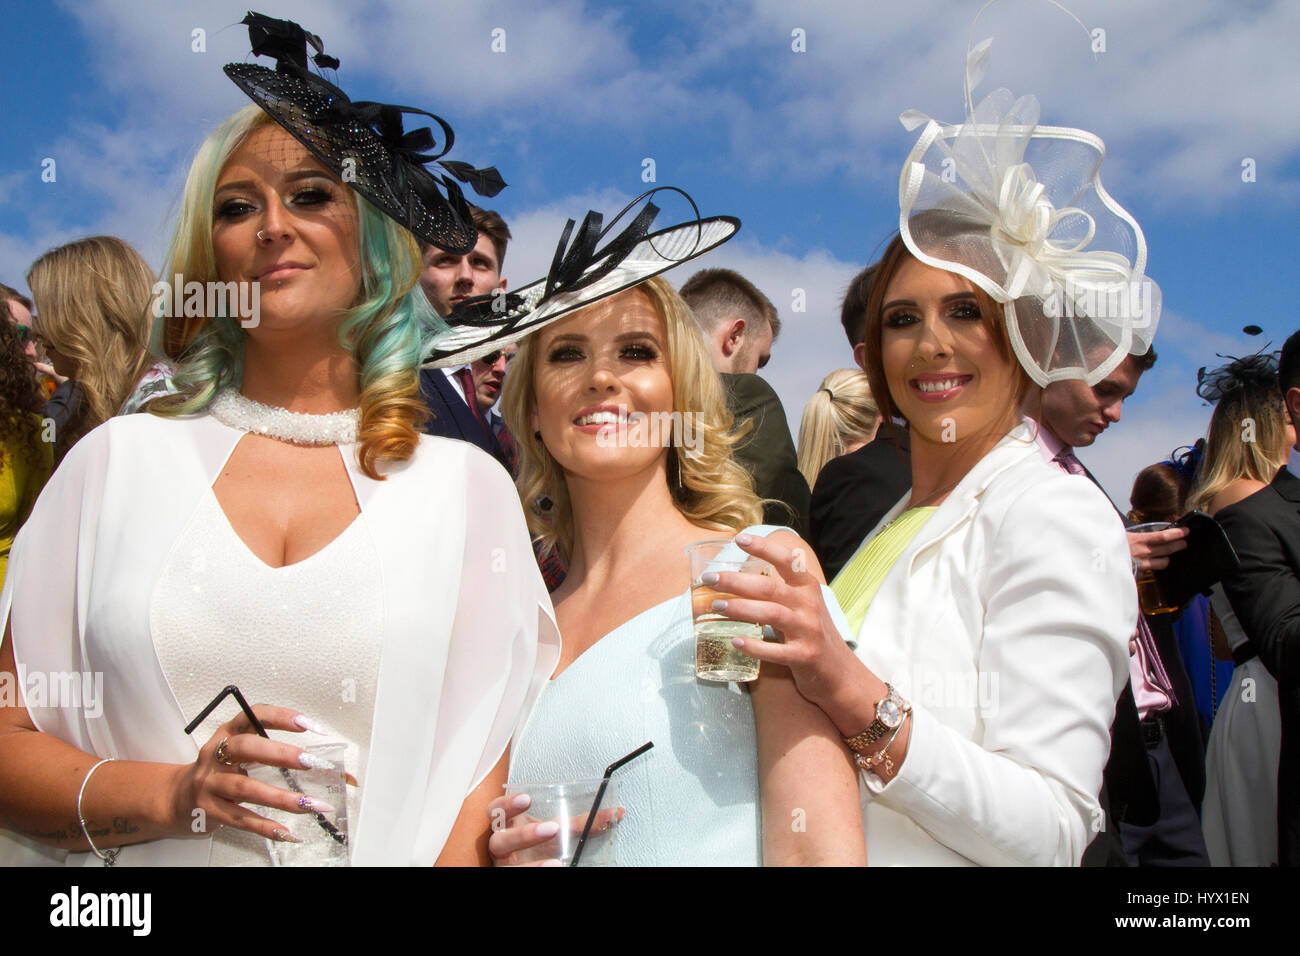 Randox Health Grand National, Liverpool, Merseyside.  7th April 2017.  The fashions pour in at the Randox Health Grand National at Aintree racecourse in Liverpool, Merseyside.  The most famous event in the horse racing calendar welcomes people on this very special parade of the finest female fashions.  Thousands of glamourous women pour through the entry gates on the one and only 'Ladies day, Aintree'.  Credit: Cernan Elias/Alamy Live News Stock Photo